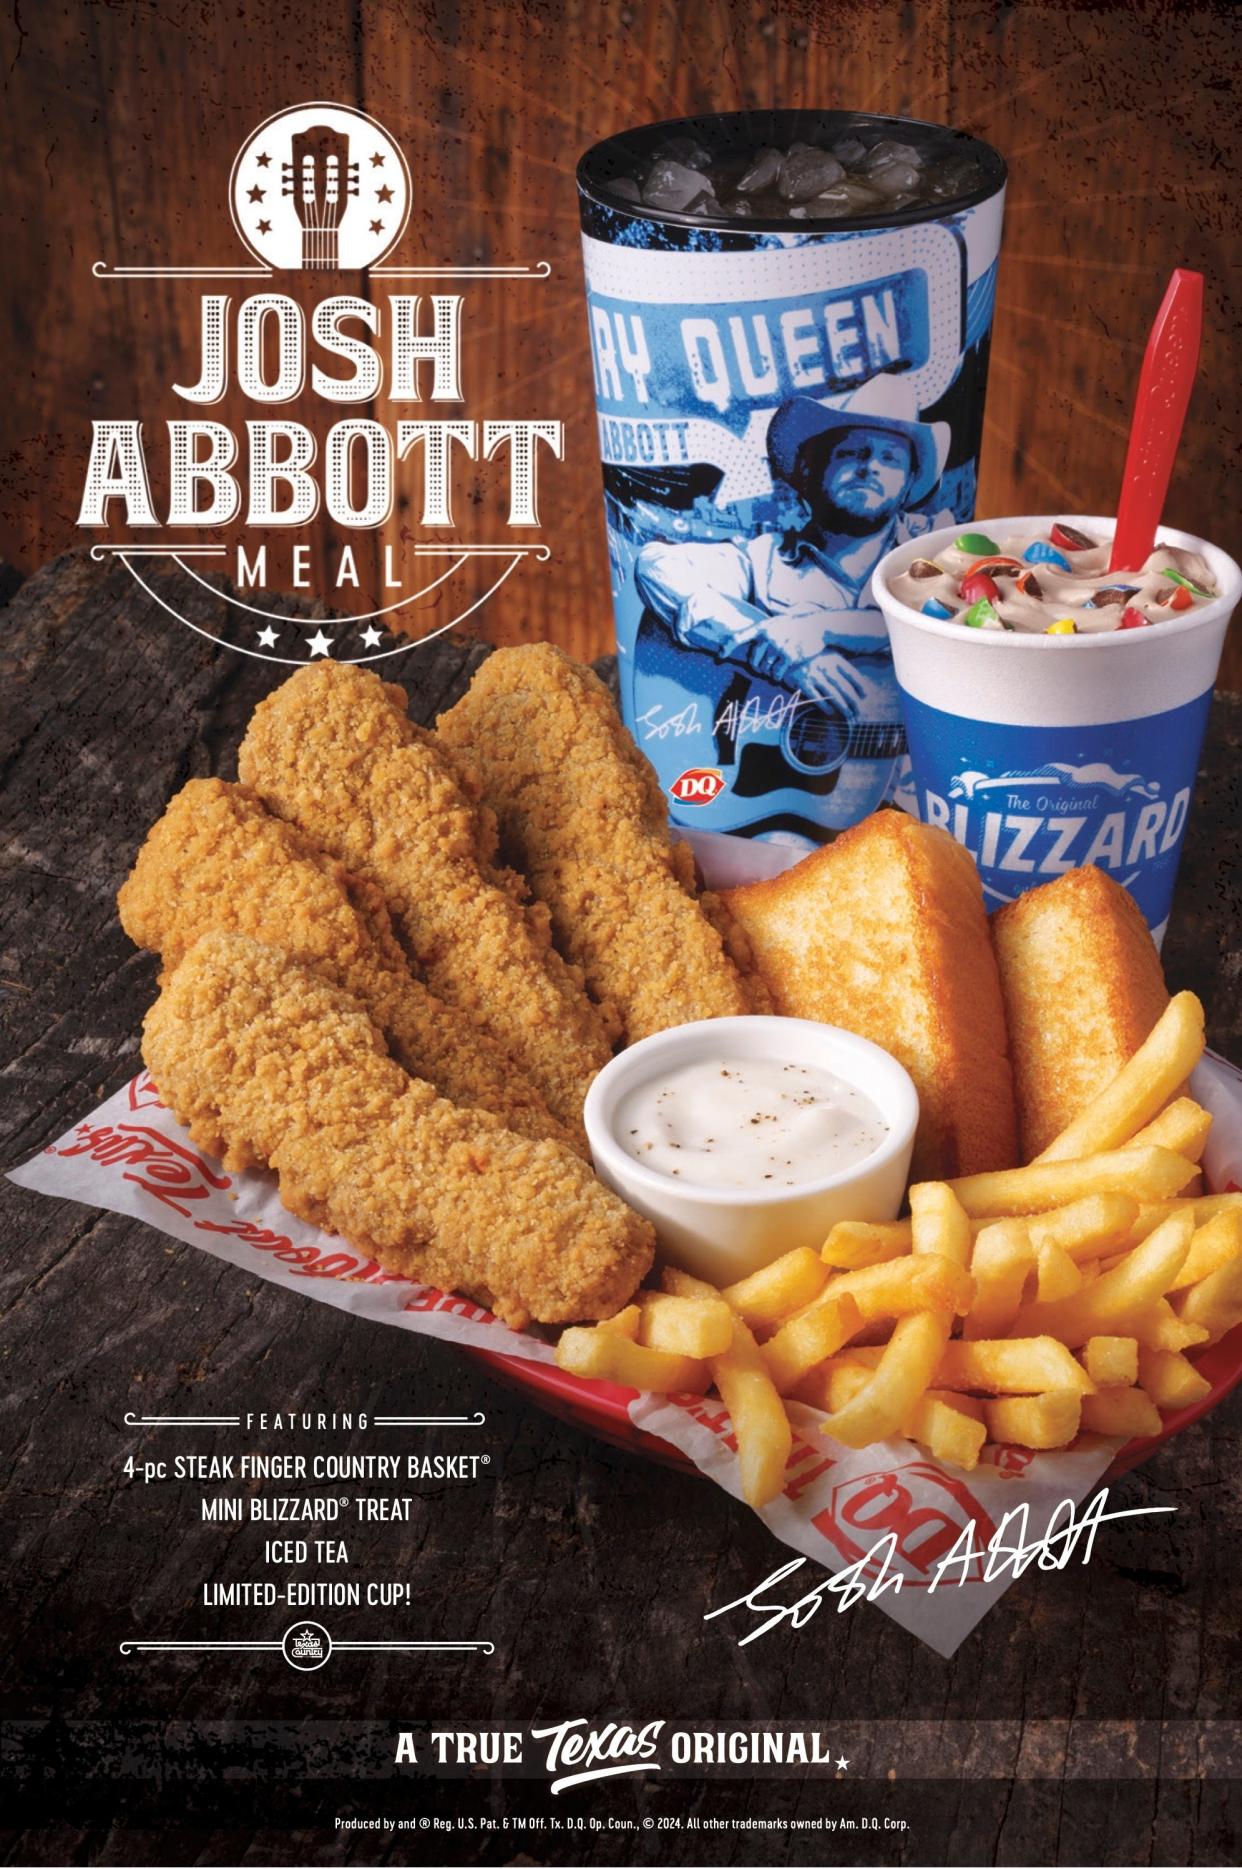 The Josh Abbott Meal features a 4-piece Steak Finger Country Basket, a mini M&M’s® Milk Chocolate Blizzard® Treat, a refreshing Iced Tea, and a collectible limited-edition Josh Abbott cup. The meal is available from April 29 to May 26 at participating restaurants.